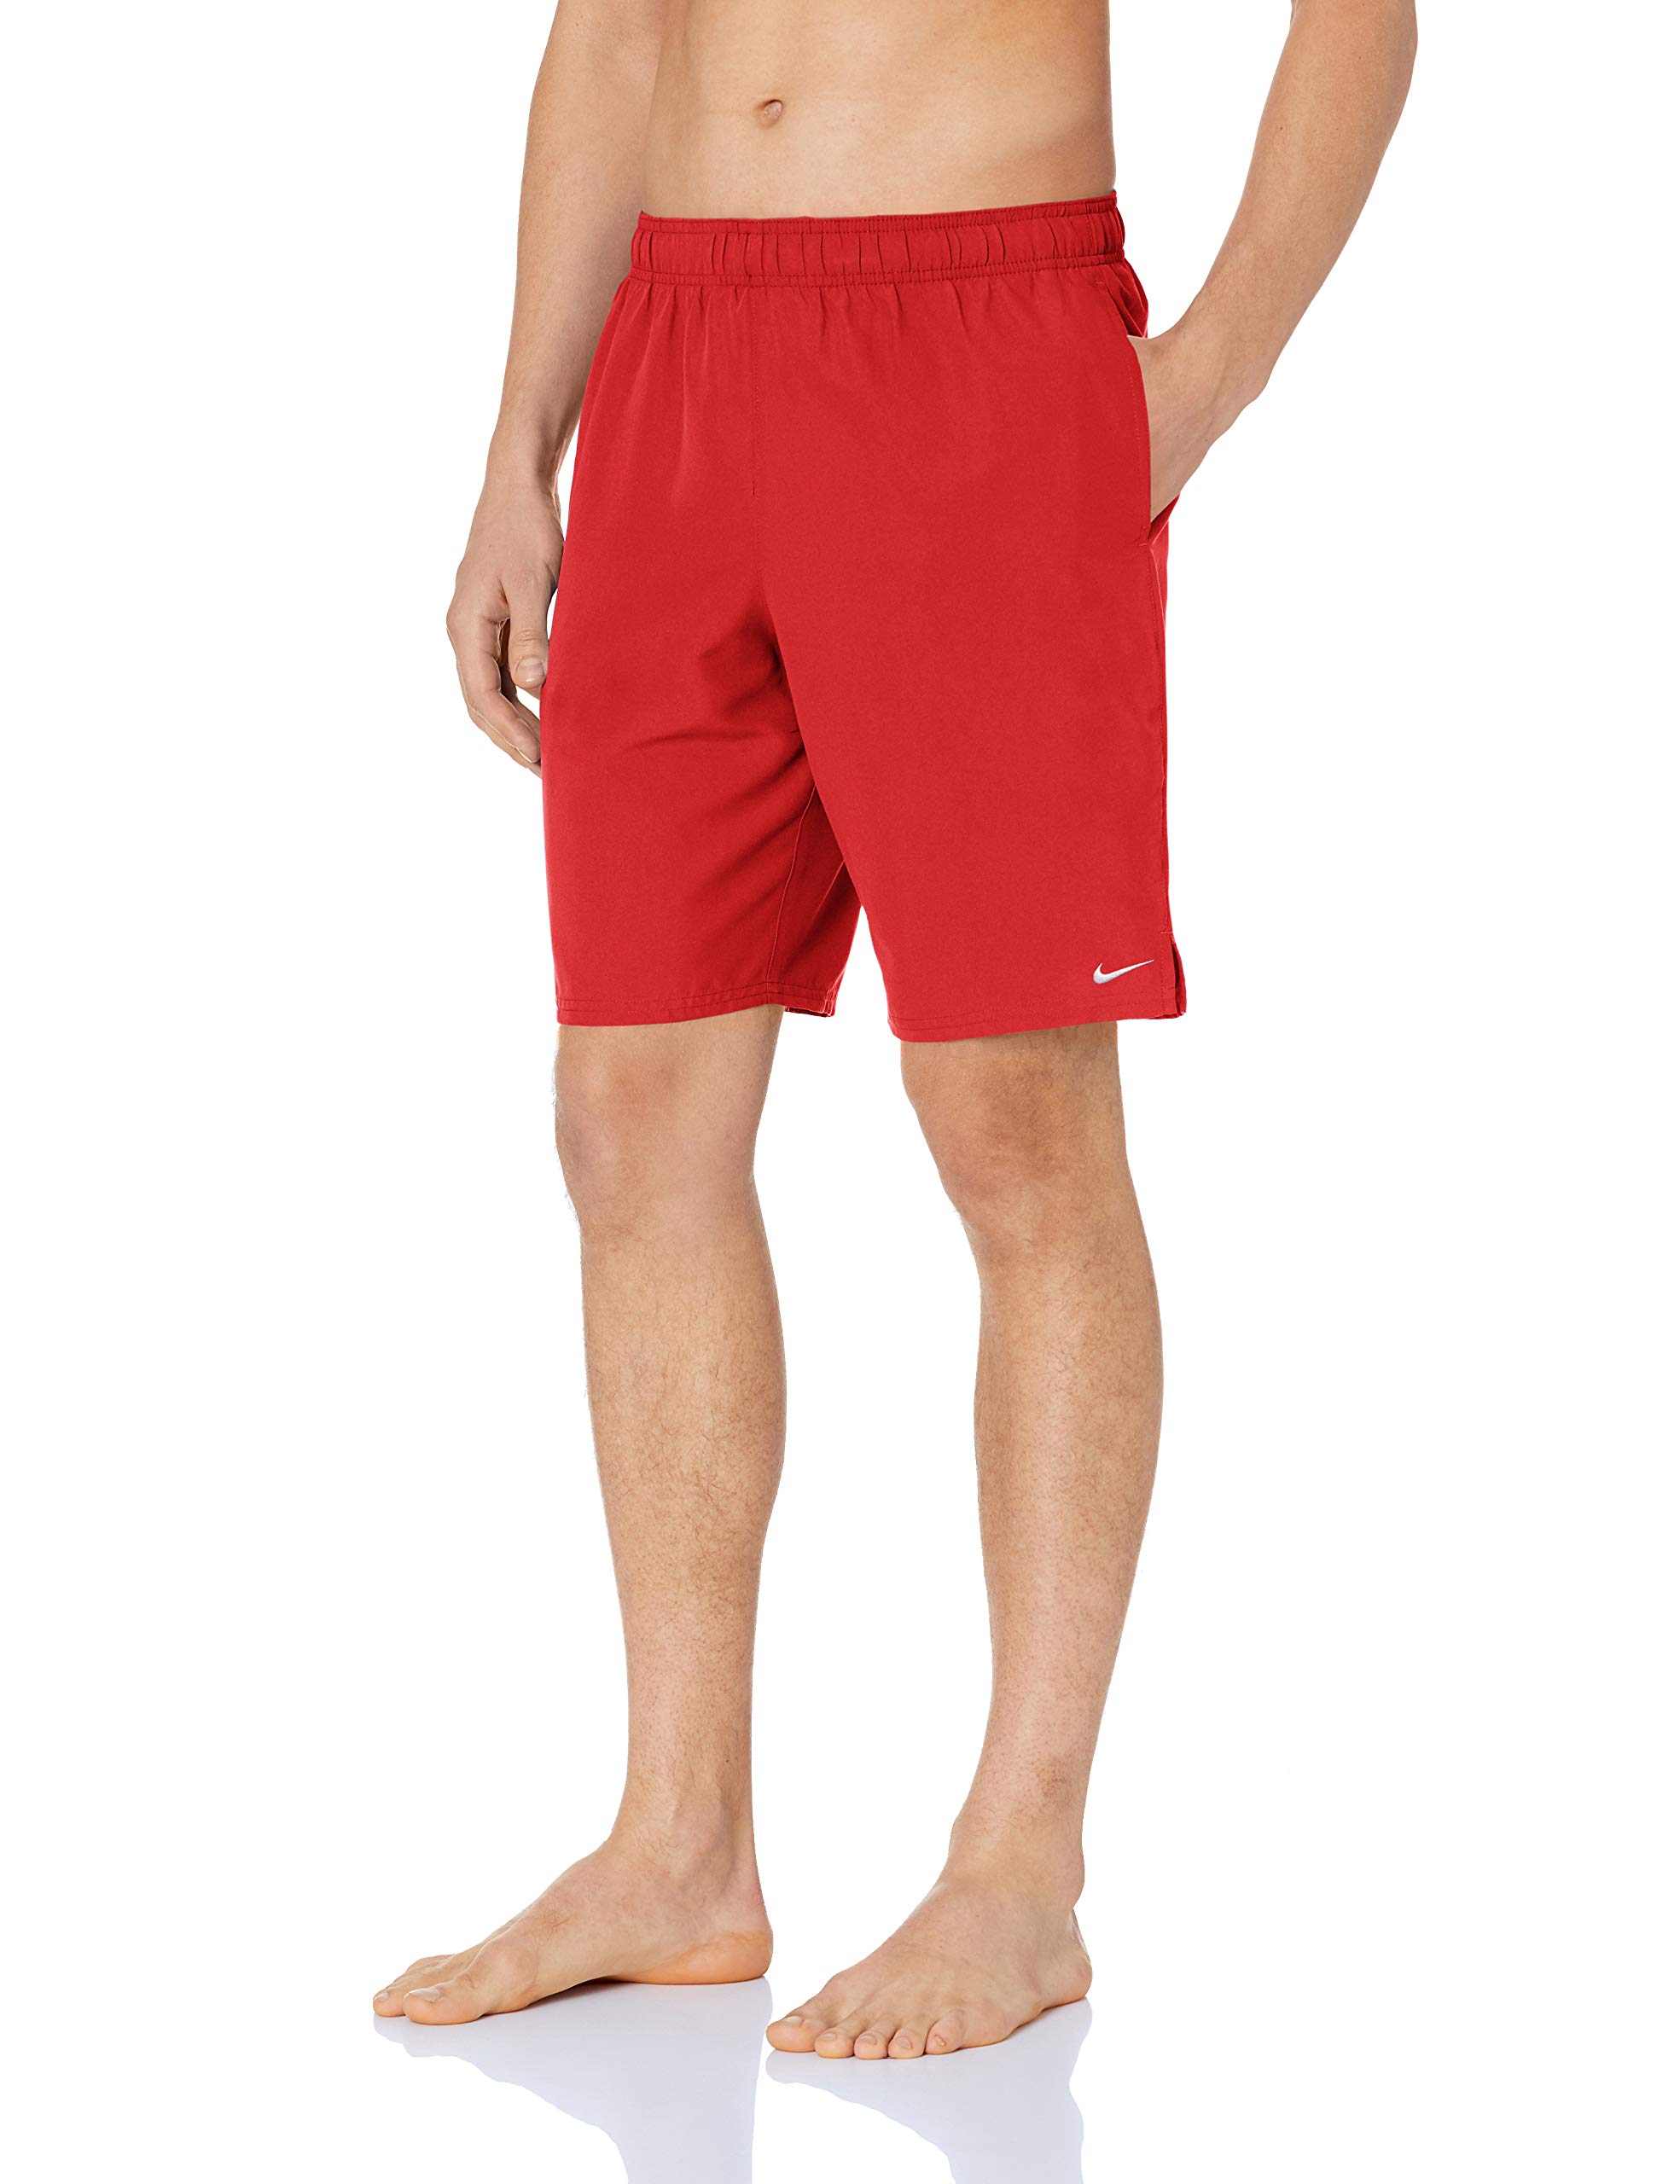 Nike Mens Solid Lap 9 Inch Volley Short Swim Trunk - University Red White - M